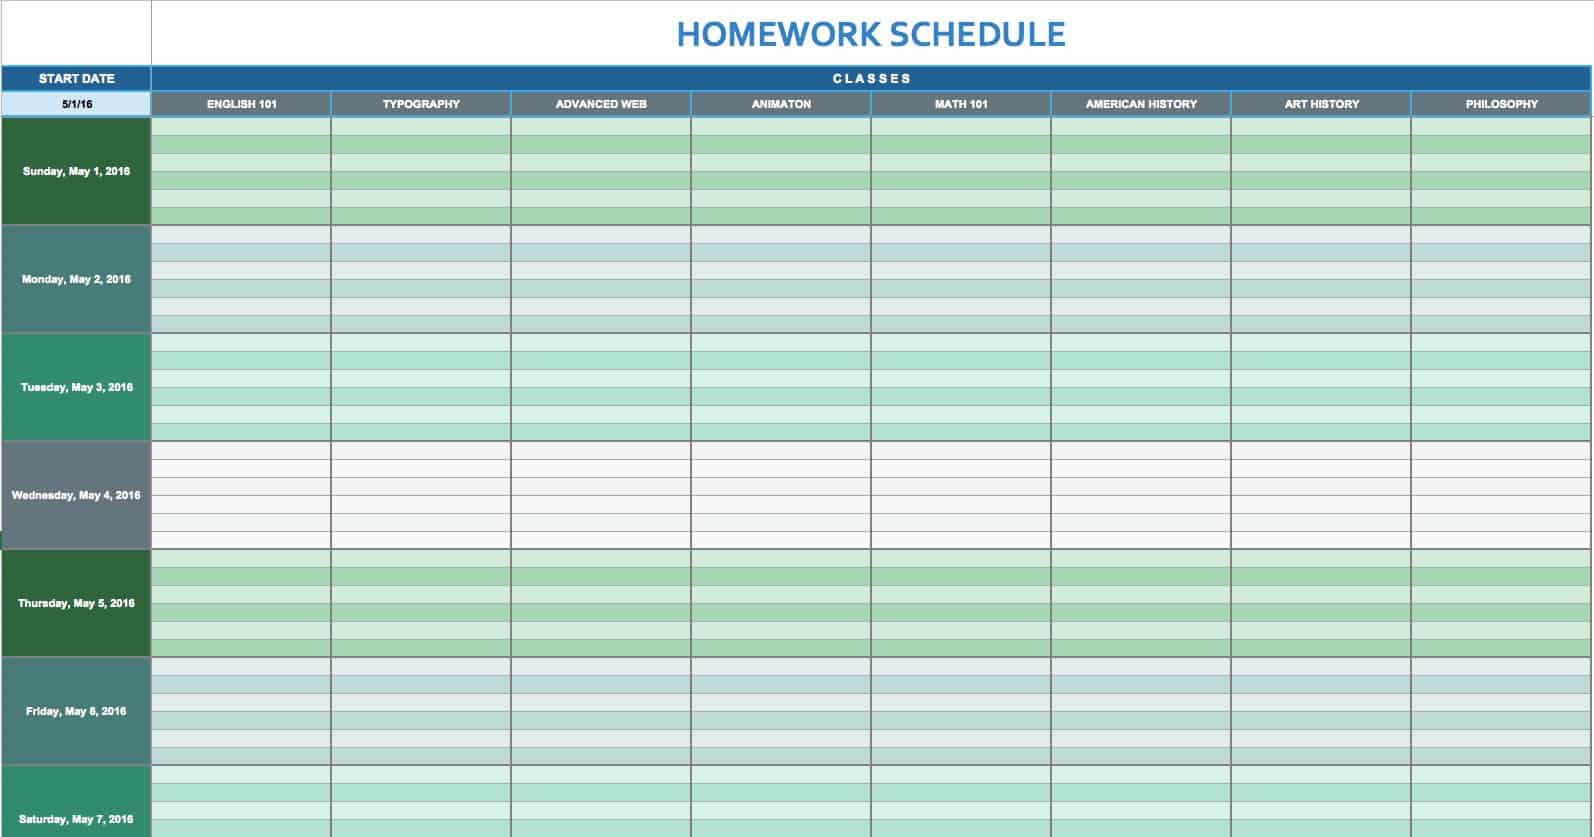 daily schedule template excel free